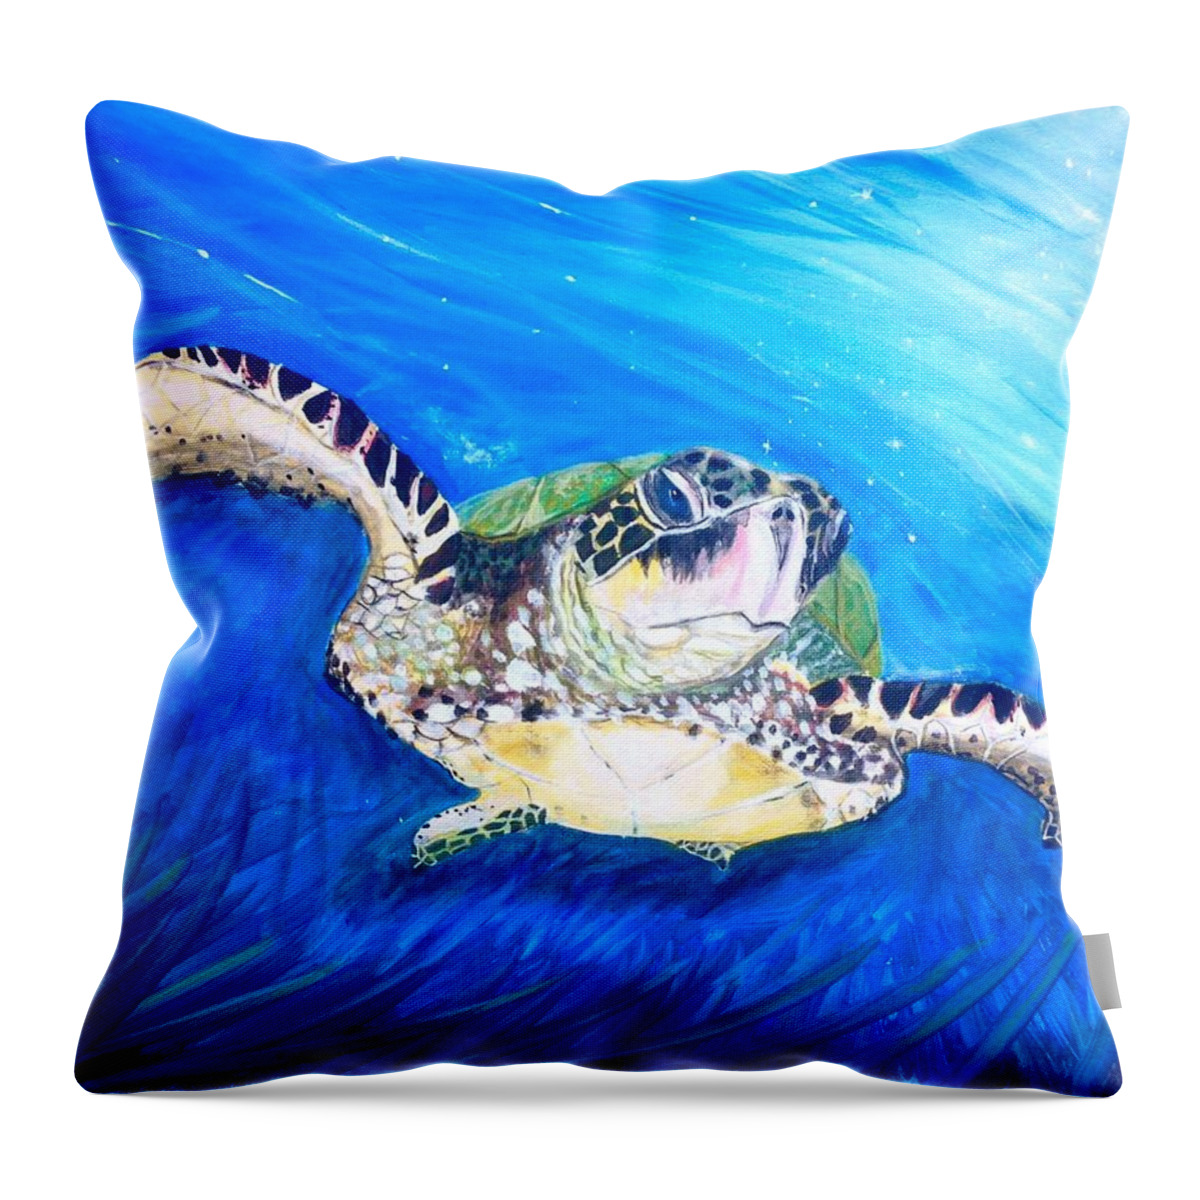 Turtle Throw Pillow featuring the painting Swim by Dawn Harrell